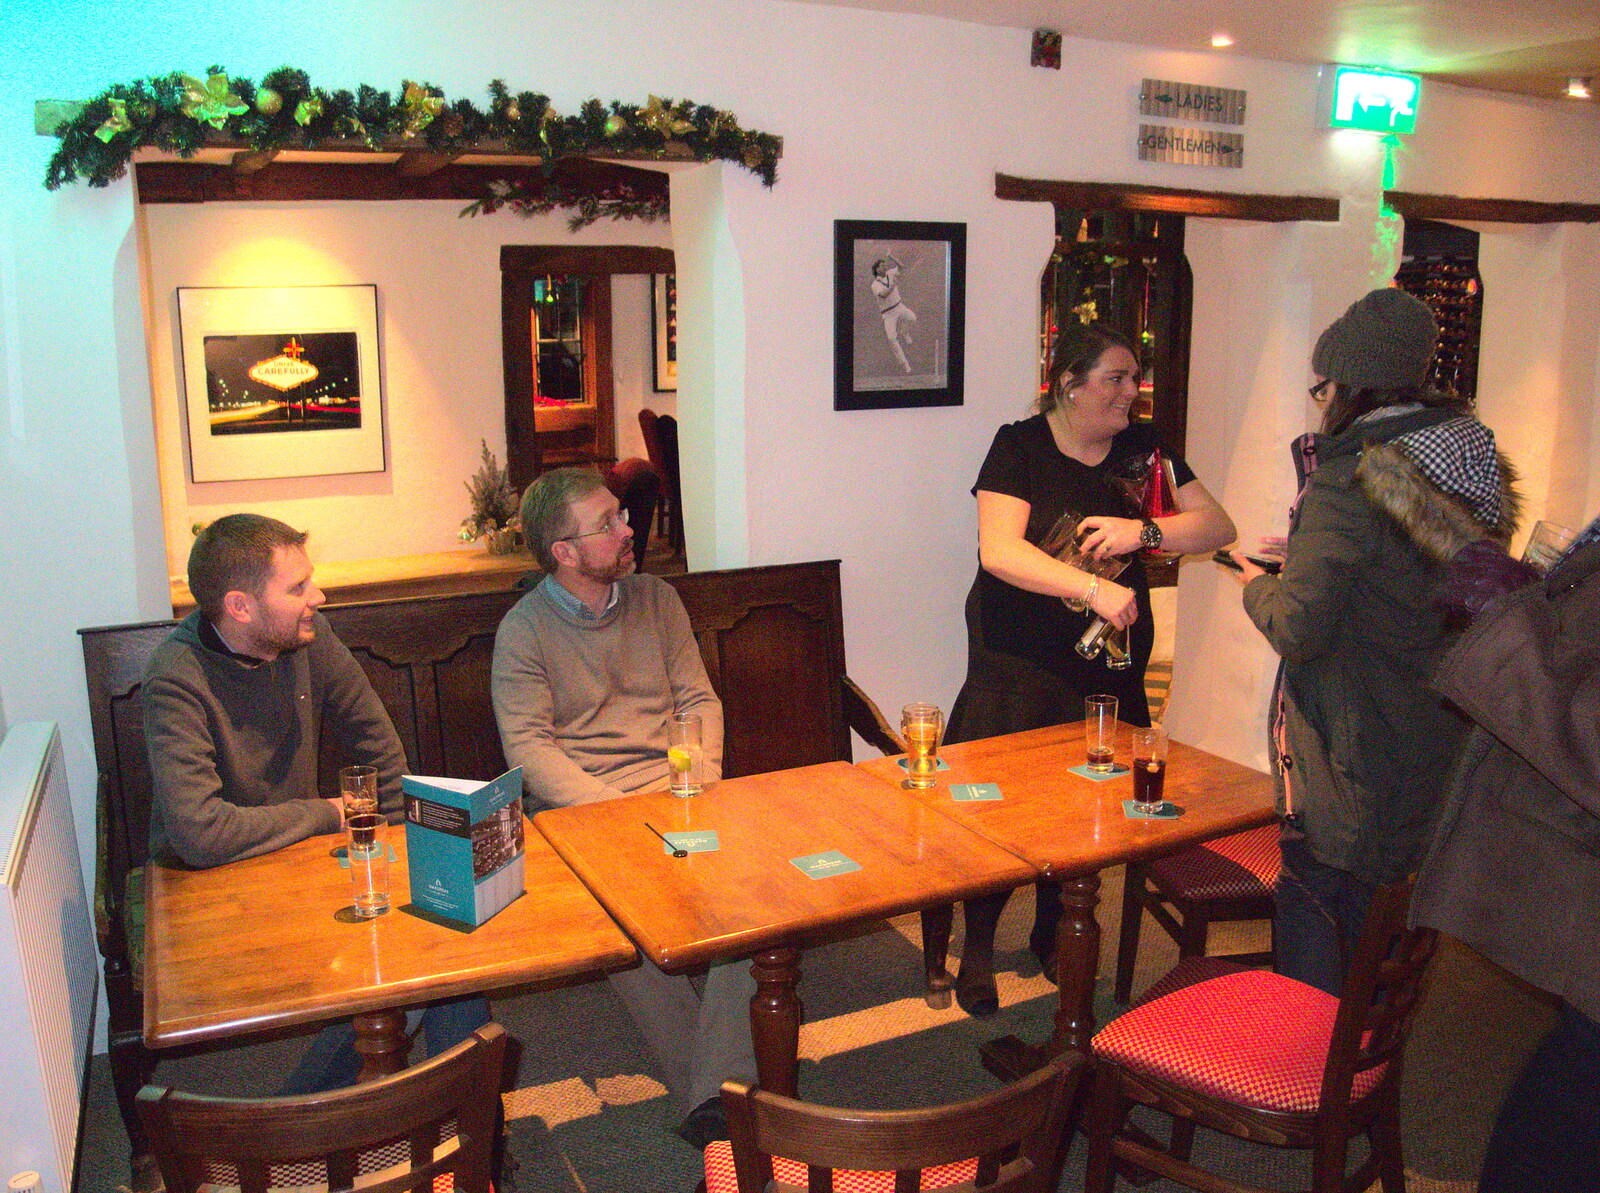 We head back inside from New Year's Eve at the Oaksmere, Brome, Suffolk - 31st December 2014